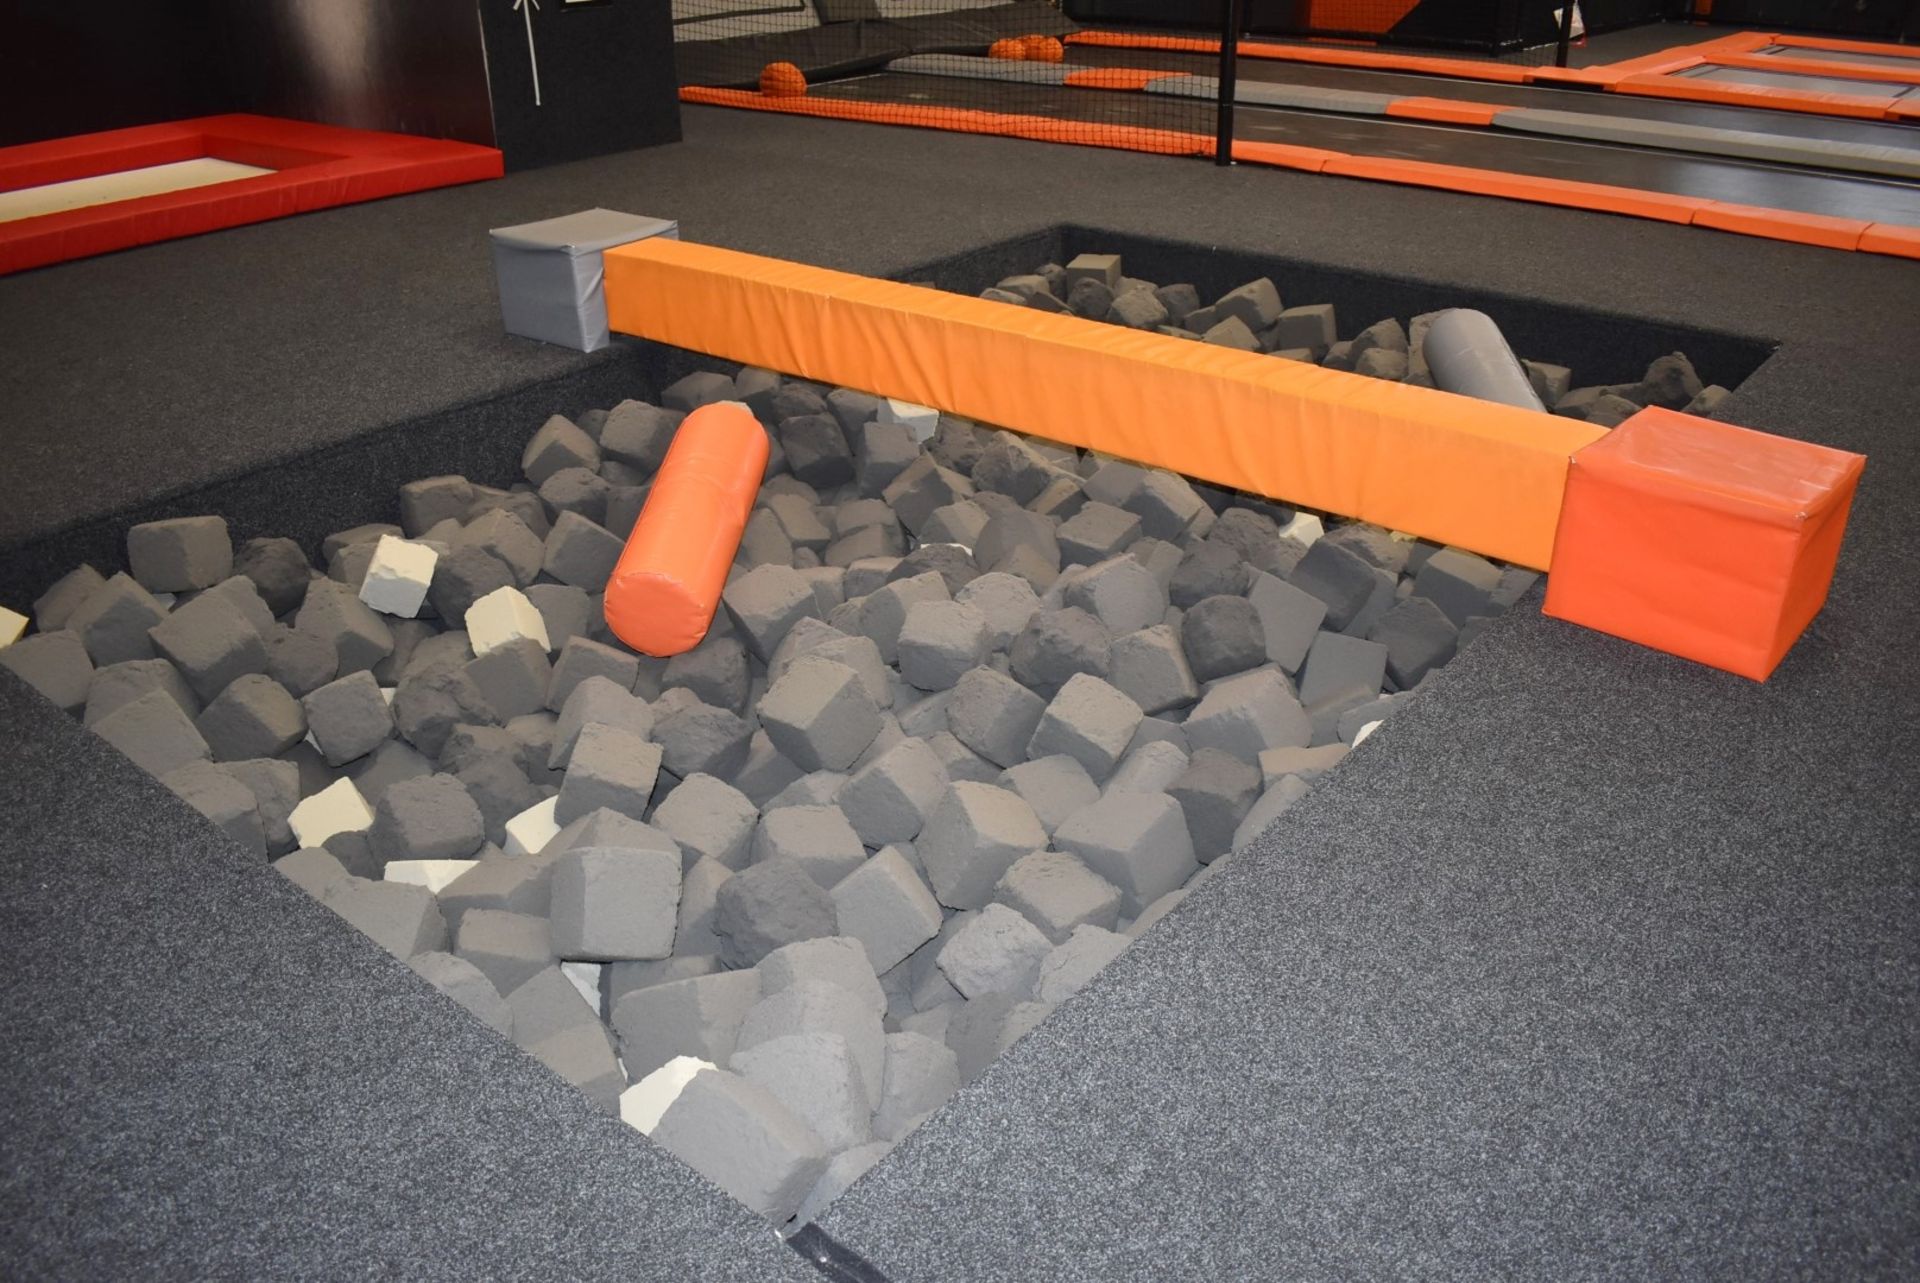 1 x Large Trampoline Park - Disassembled - Includes Dodgeball Arena And Jump Tower - CL766  - - Image 31 of 99